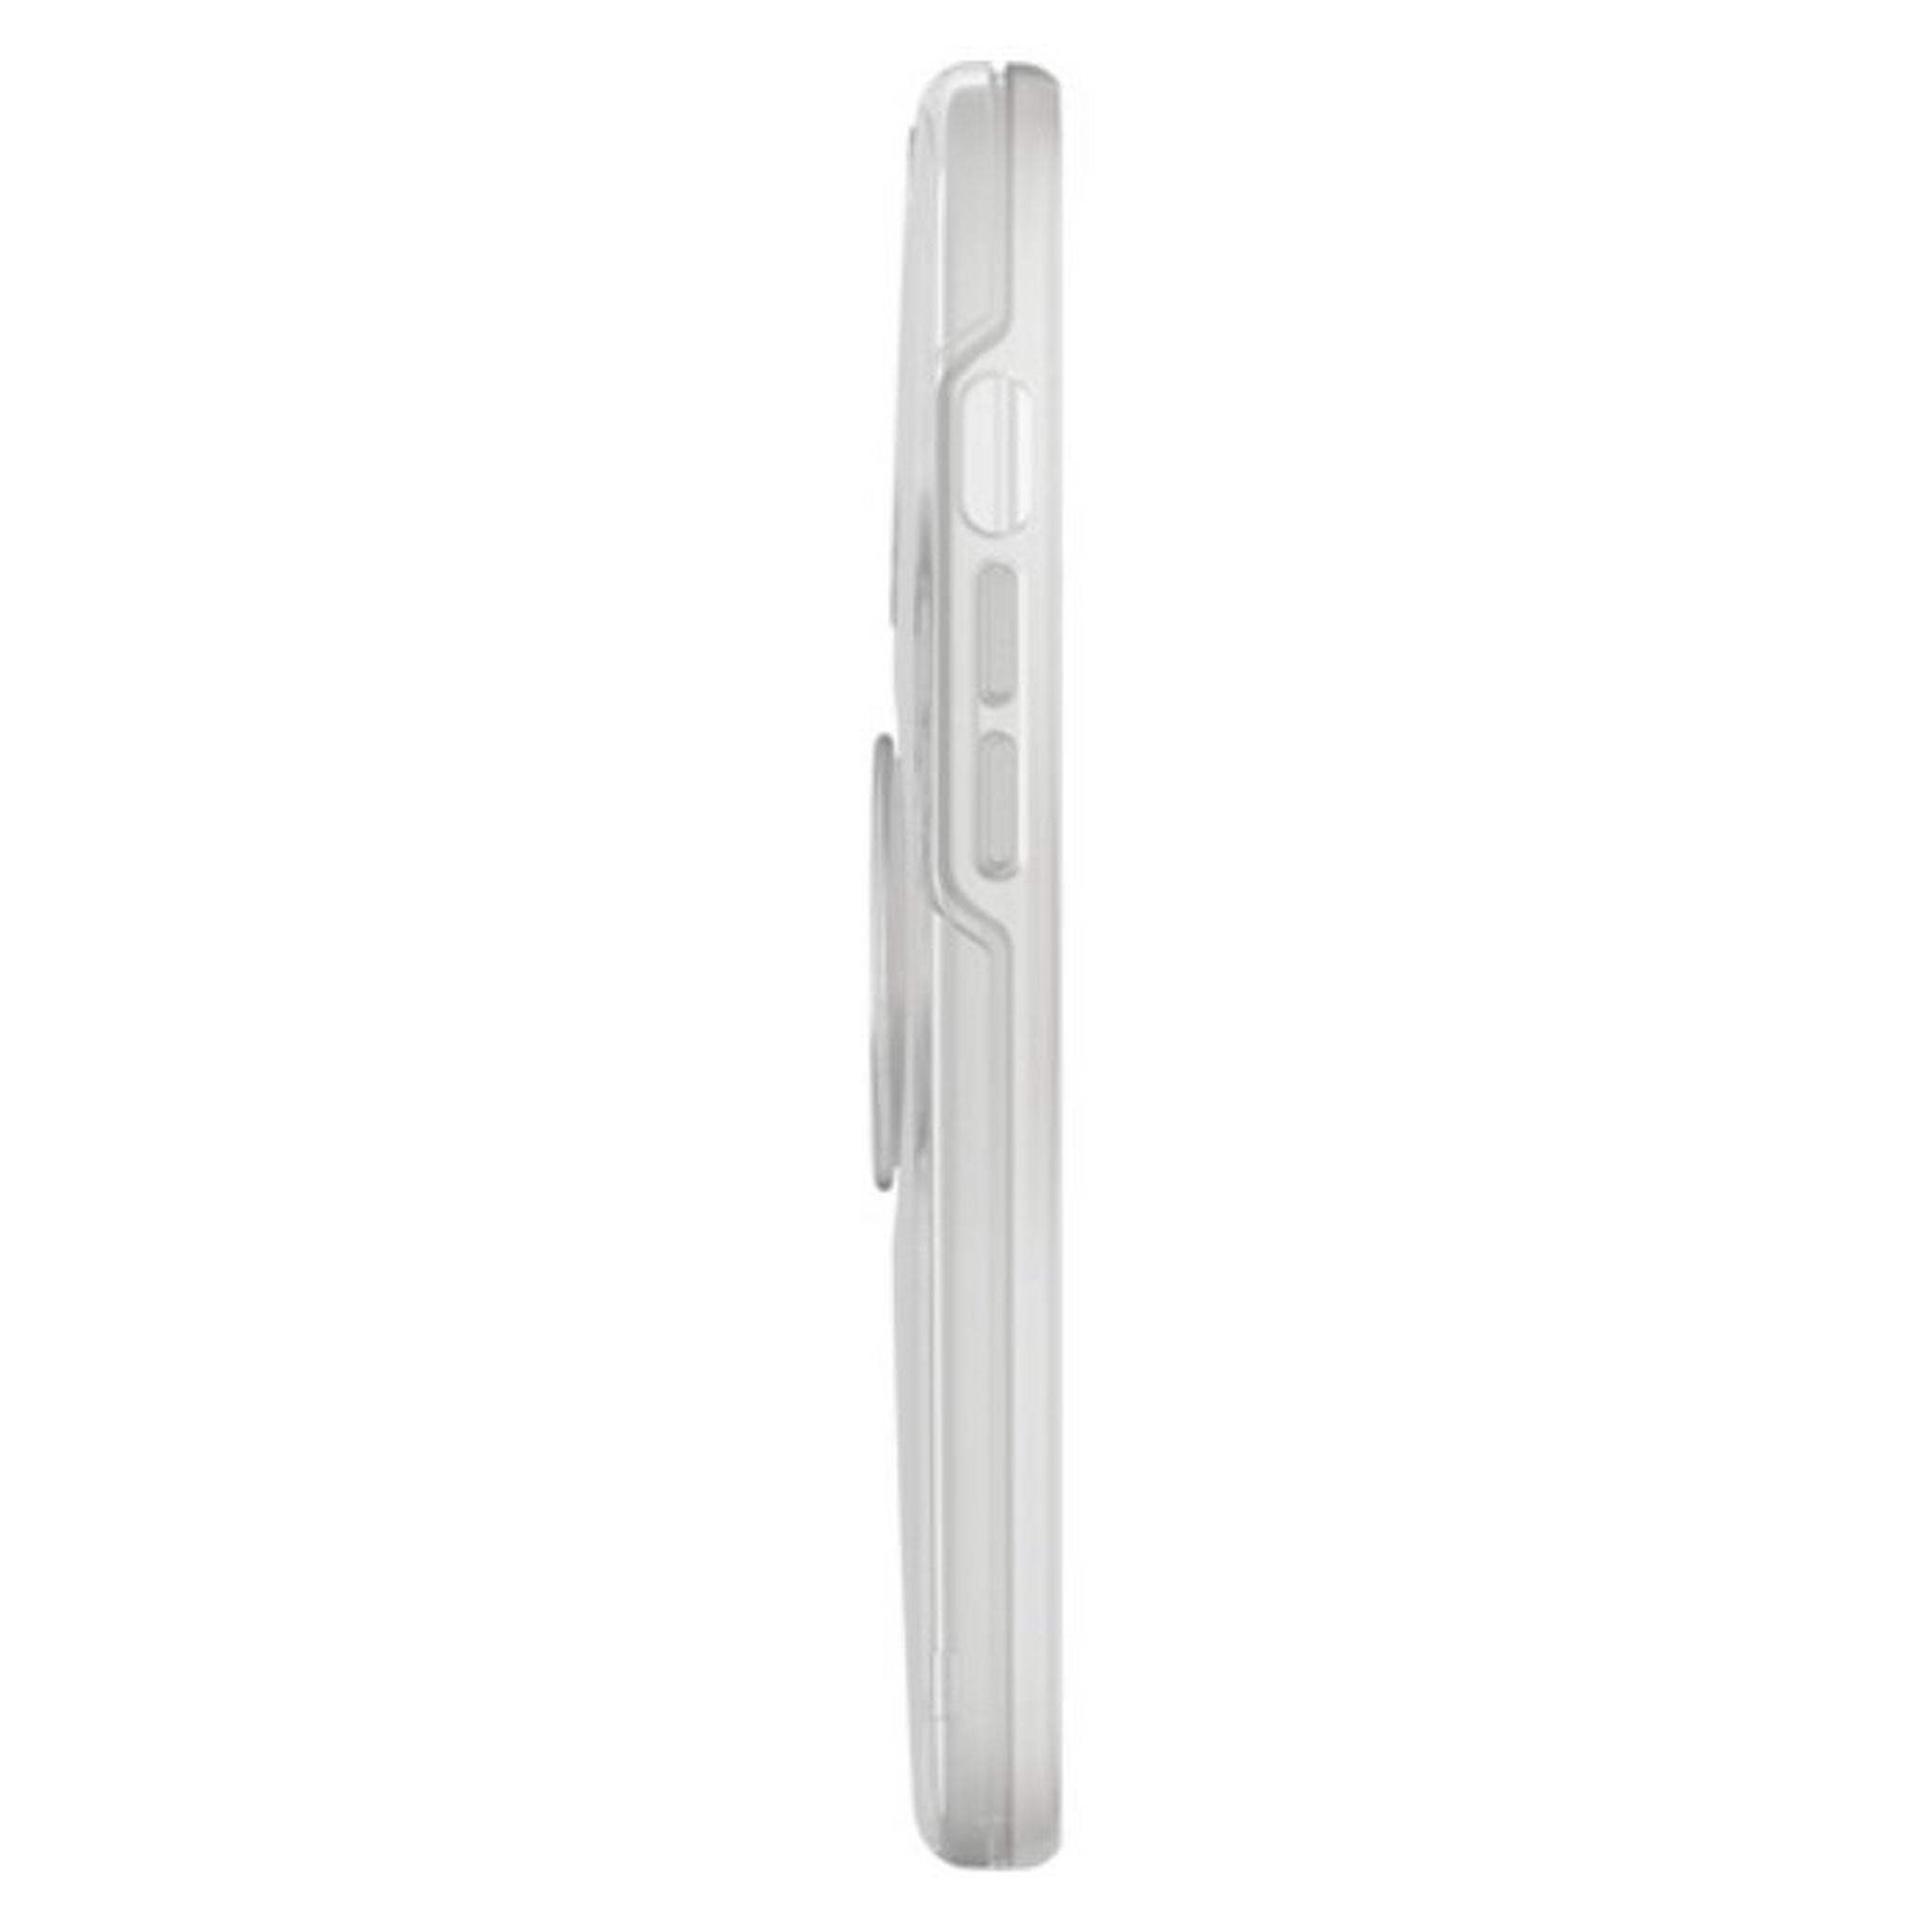 Otterbox Otter Pop Symmetry Antimicrobial Case for iPhone 13 - Clear